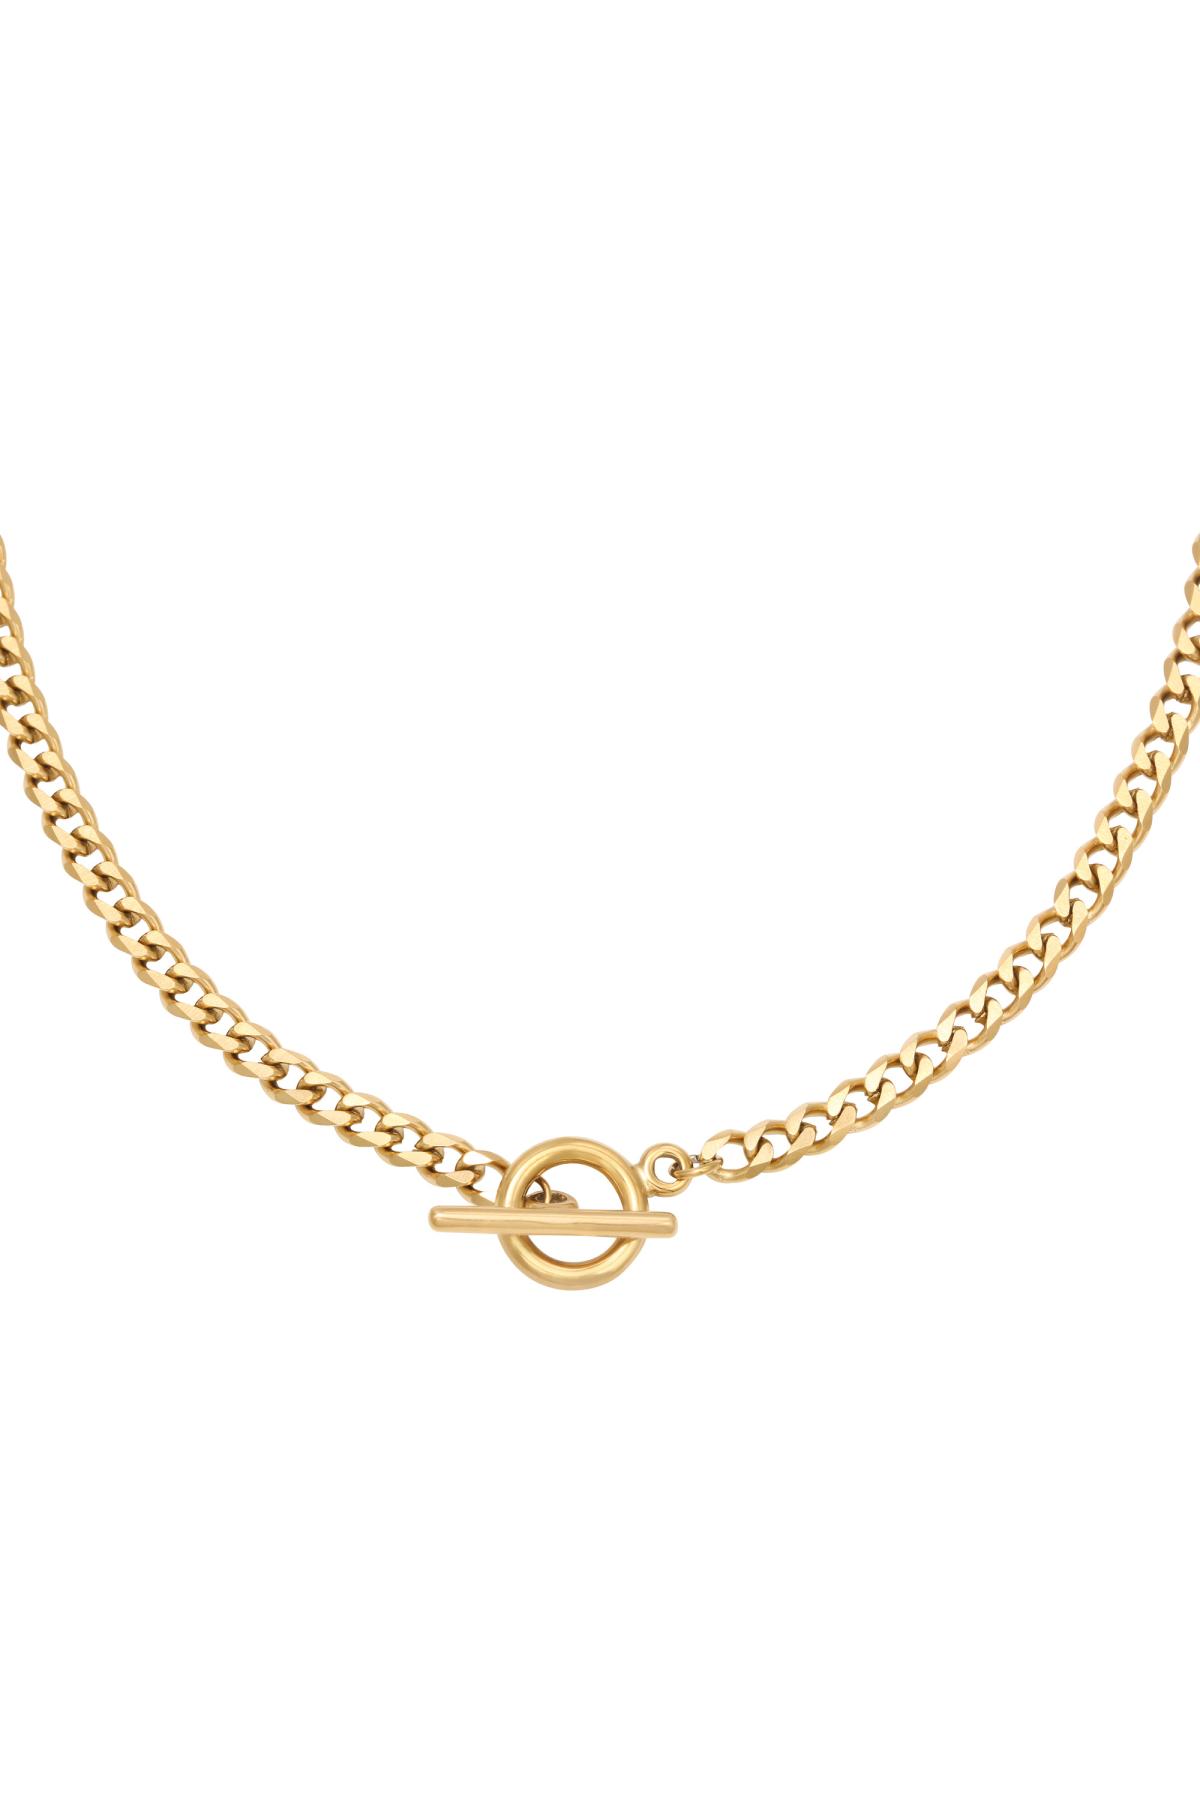 Necklace Chain Sanya Gold Stainless Steel h5 